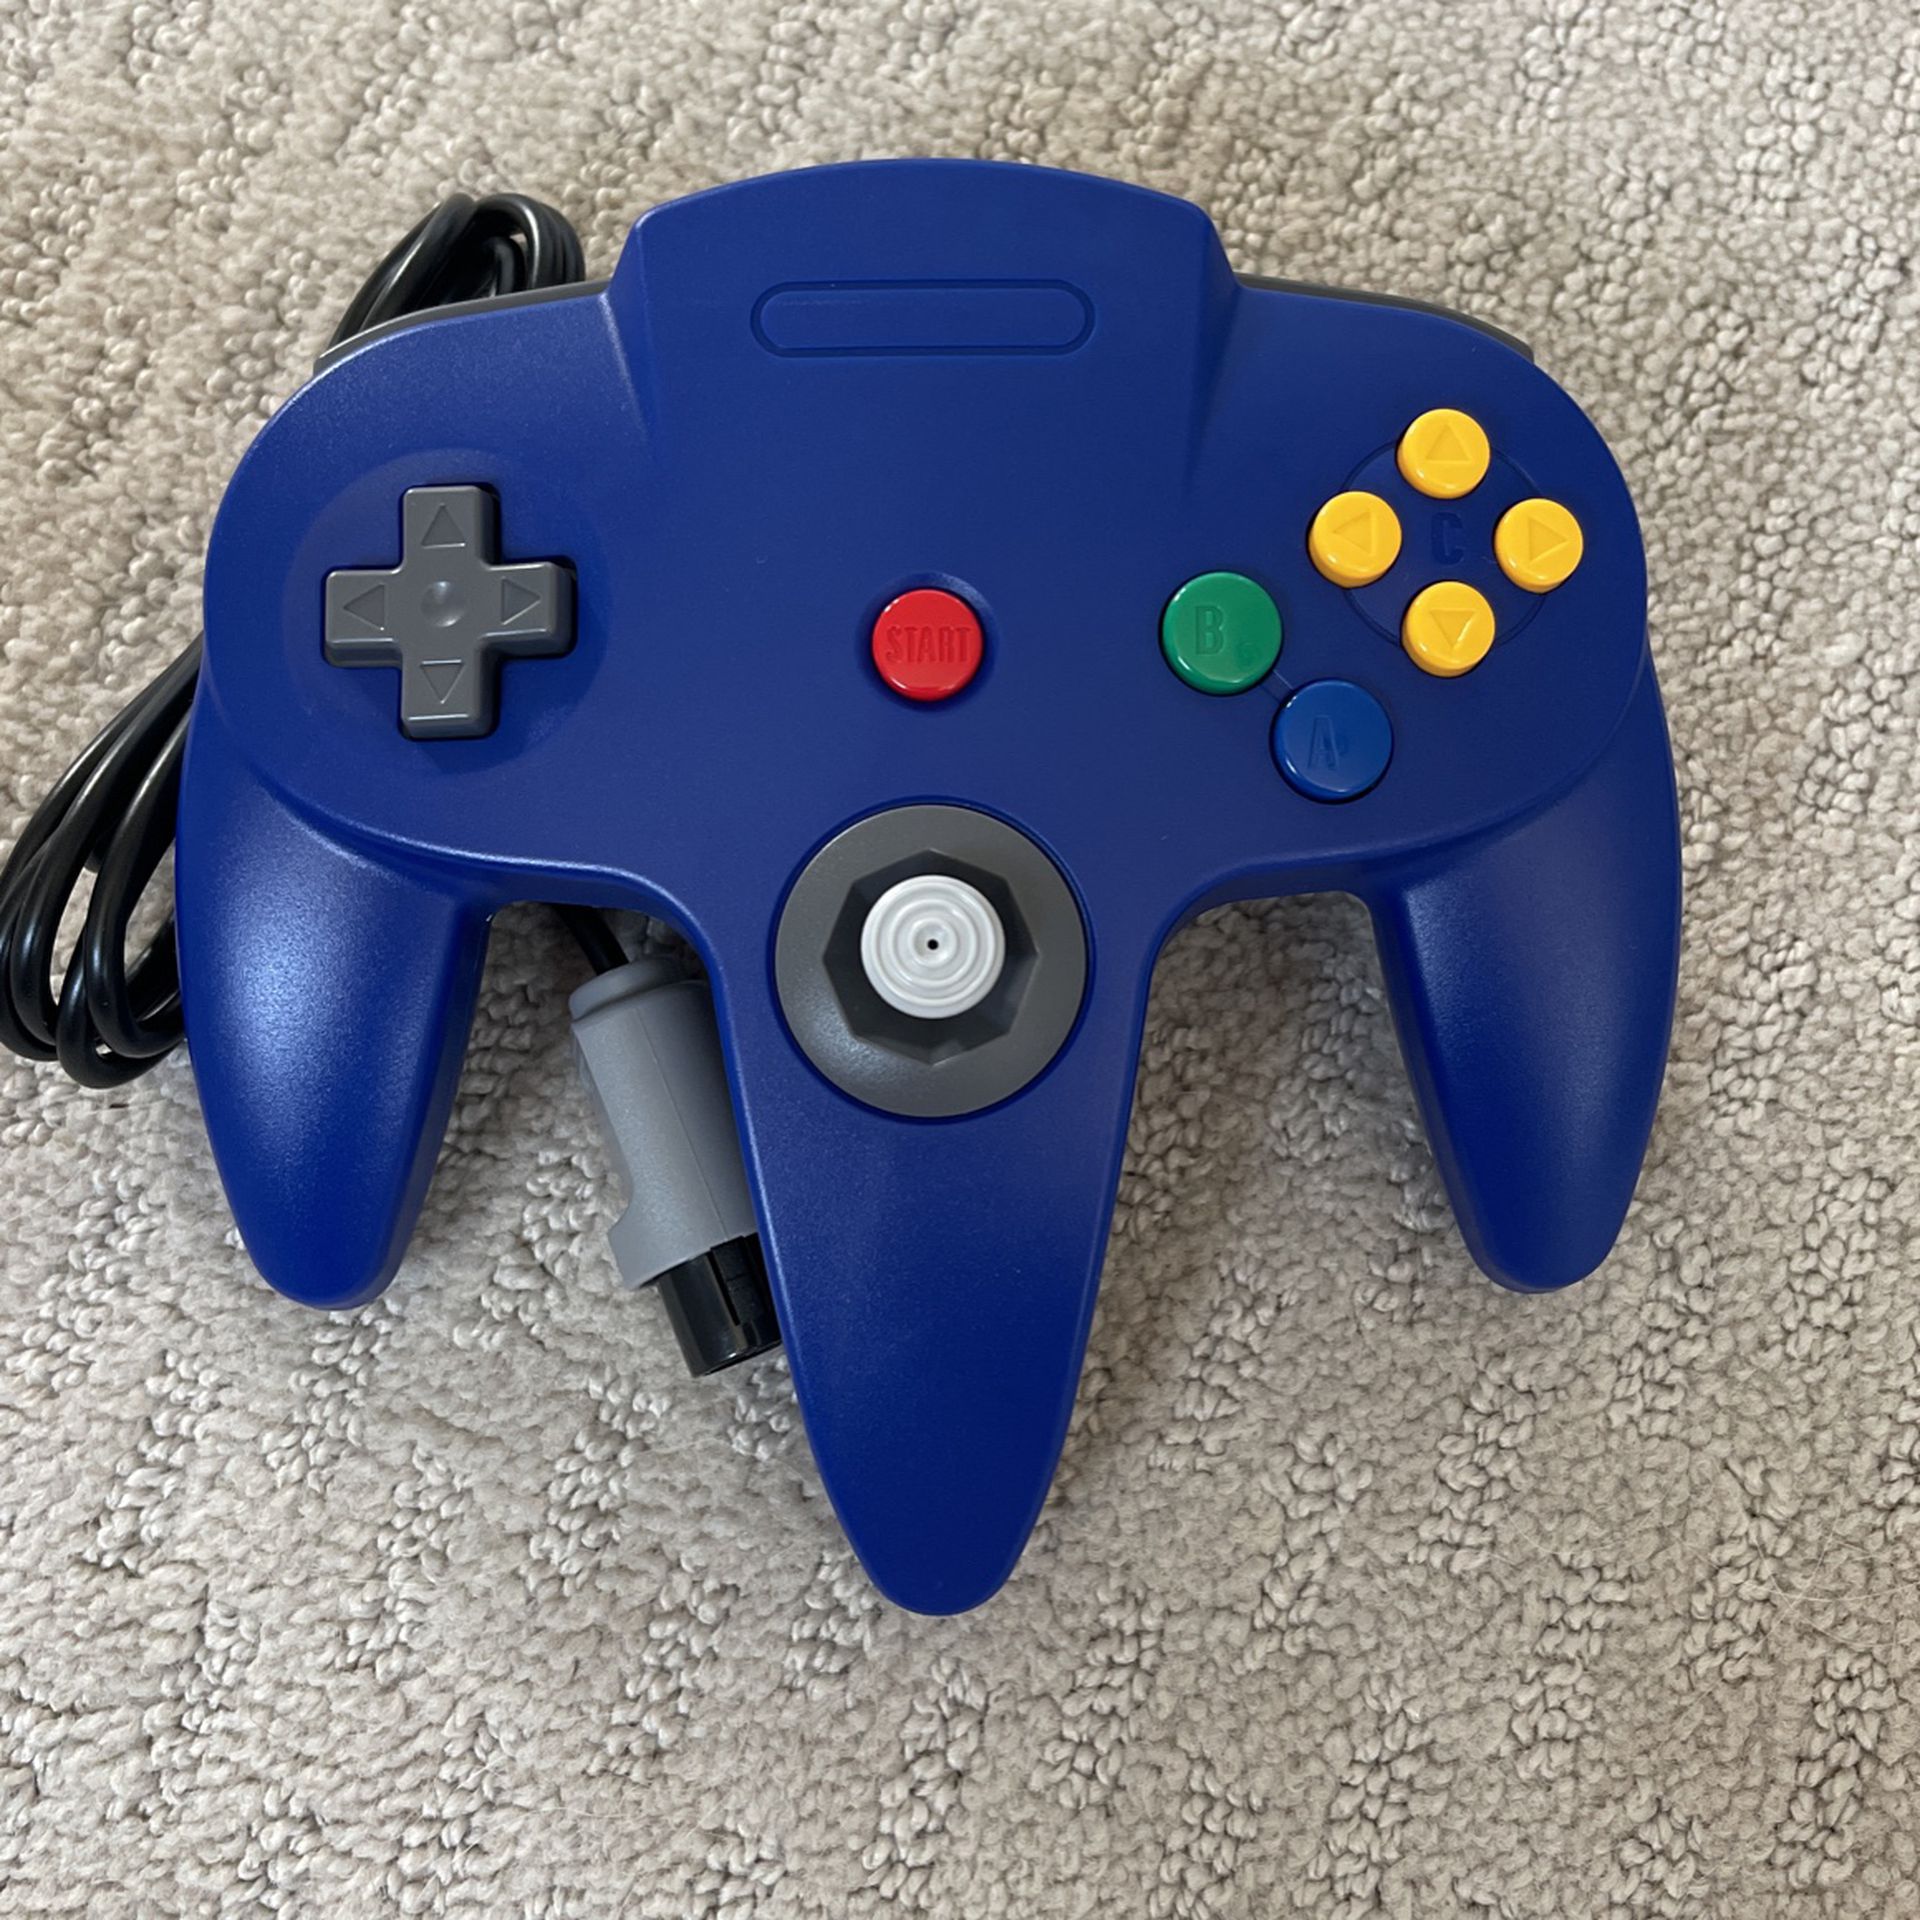 N64 Controllers (2) - Never Used